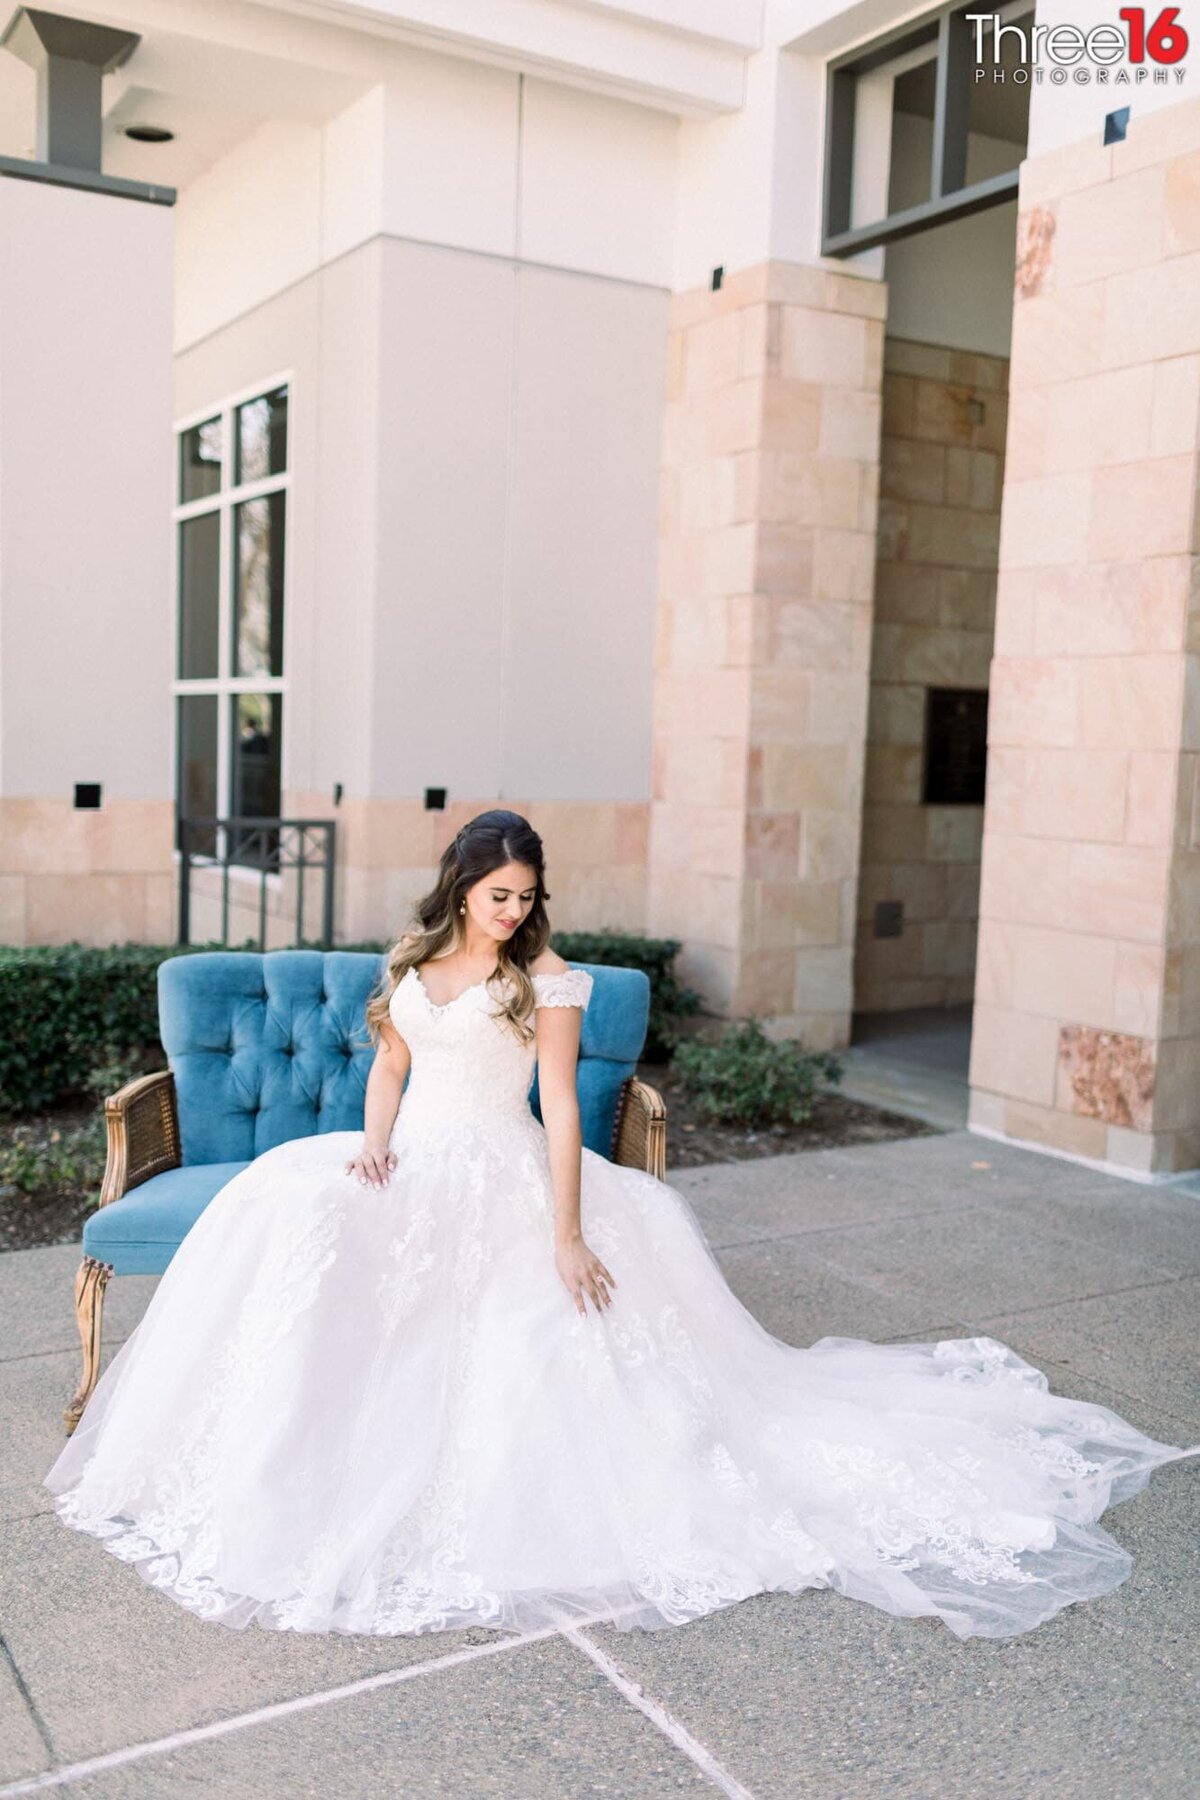 Bride poses before the ceremony sitting on a blue love seat with her dress fanned out in front of the entrance at the Yorba Linda Community Center